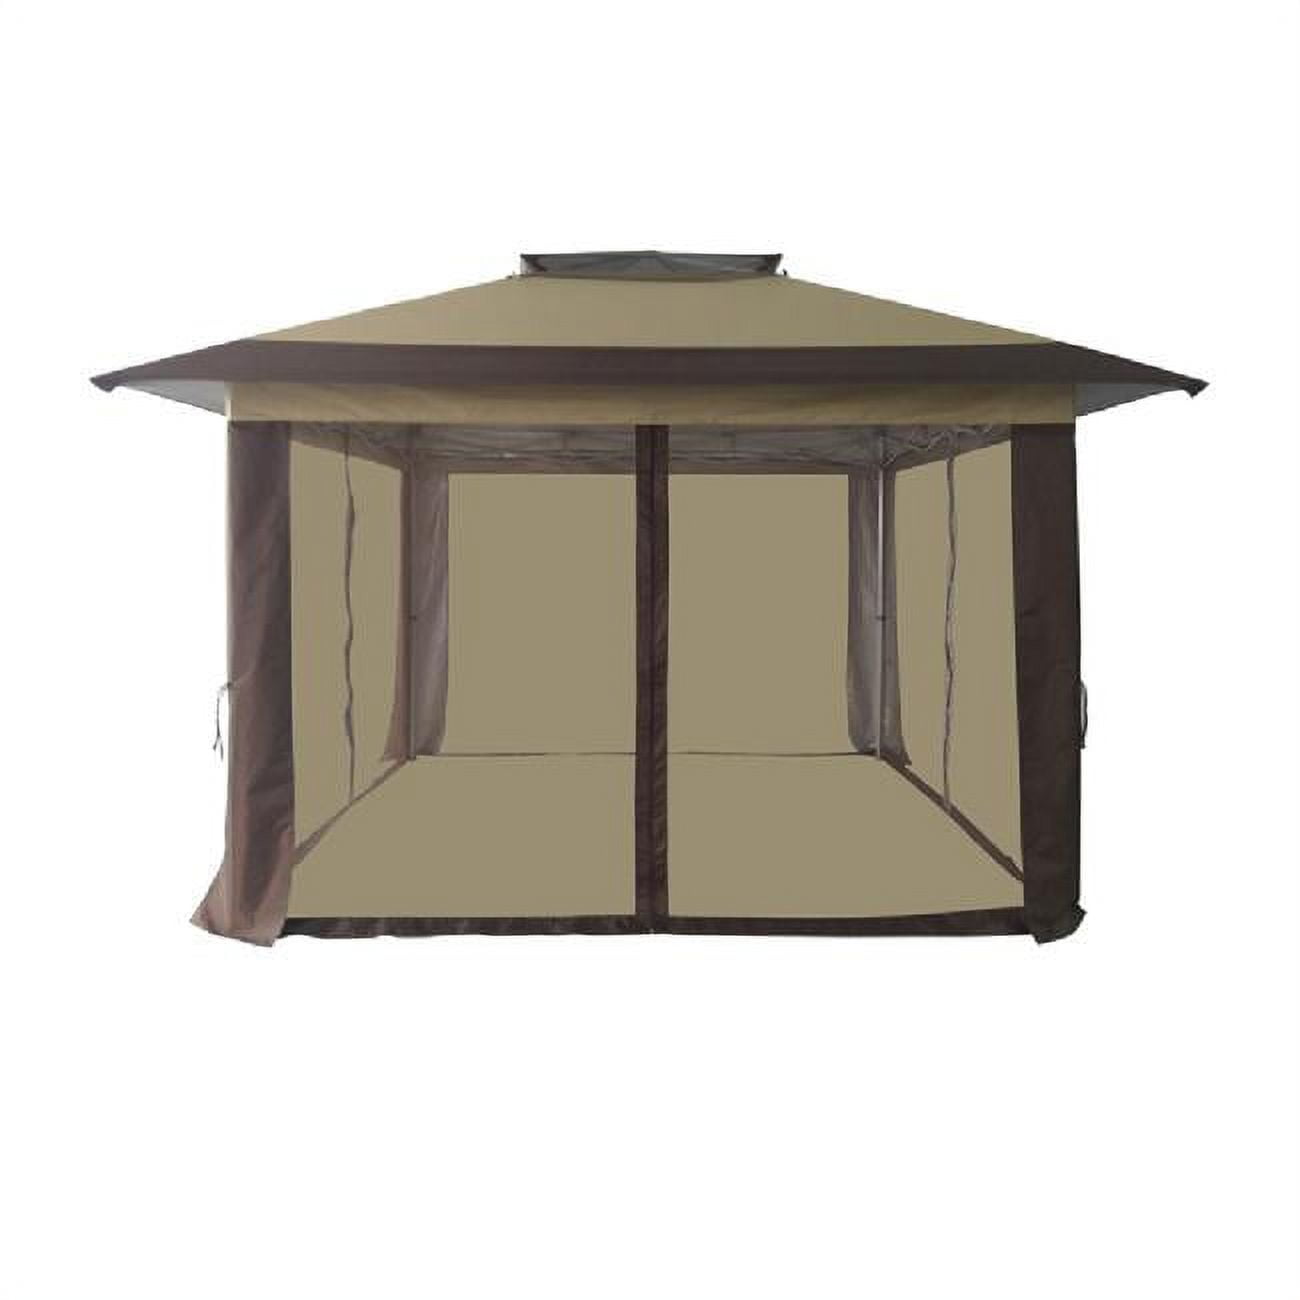 Picture of ACE Trading - Canopies 8068386 10 x 10 ft. Pop Up Gazebo